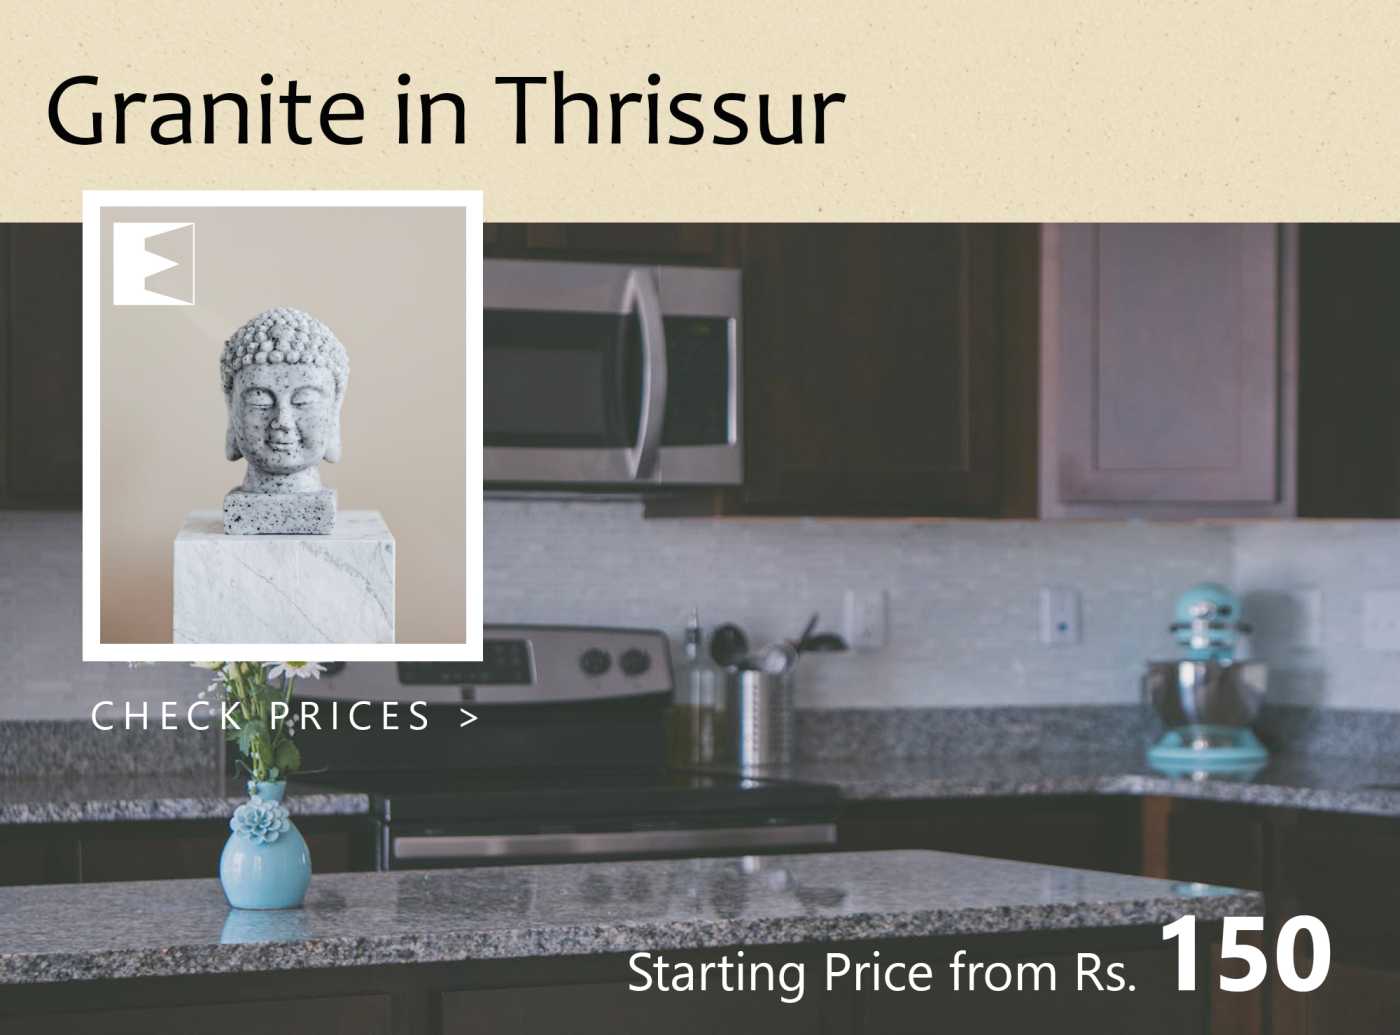 Granite Price in Thrissur | Starting from 150 INR